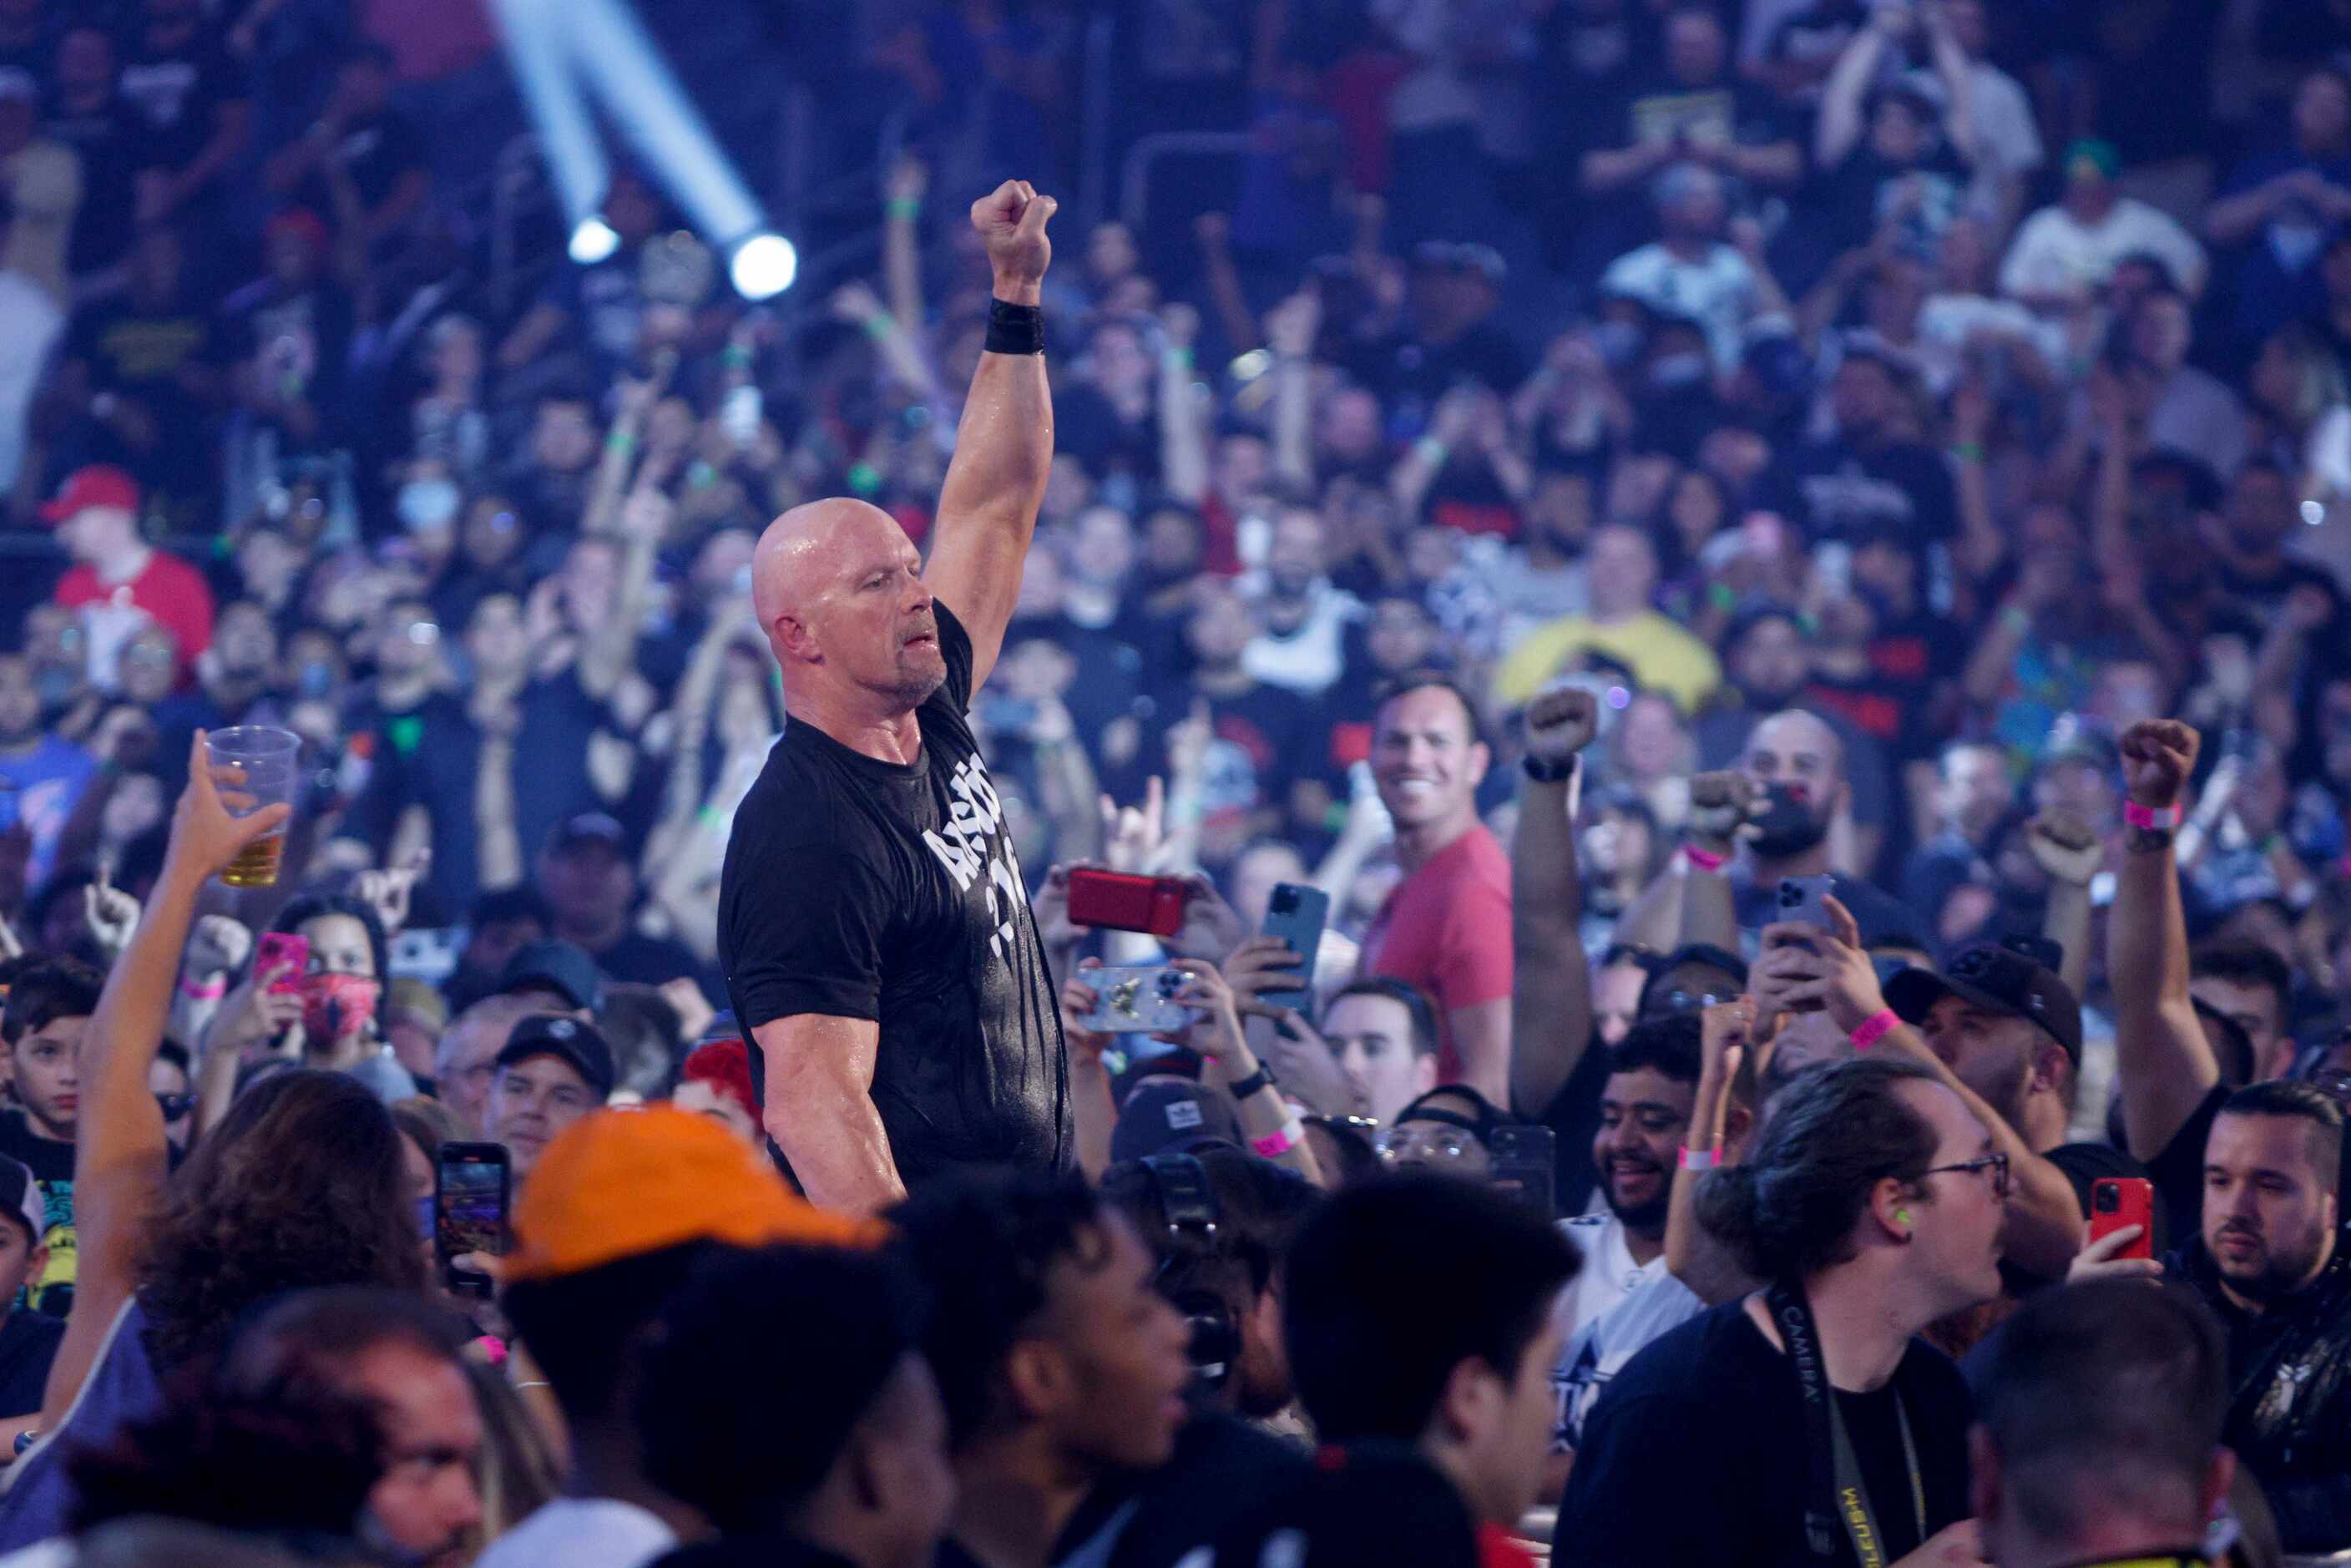 “Stone Cold” Steve Austin celebrates after defeating Kevin Owens in a match at WrestleMania...